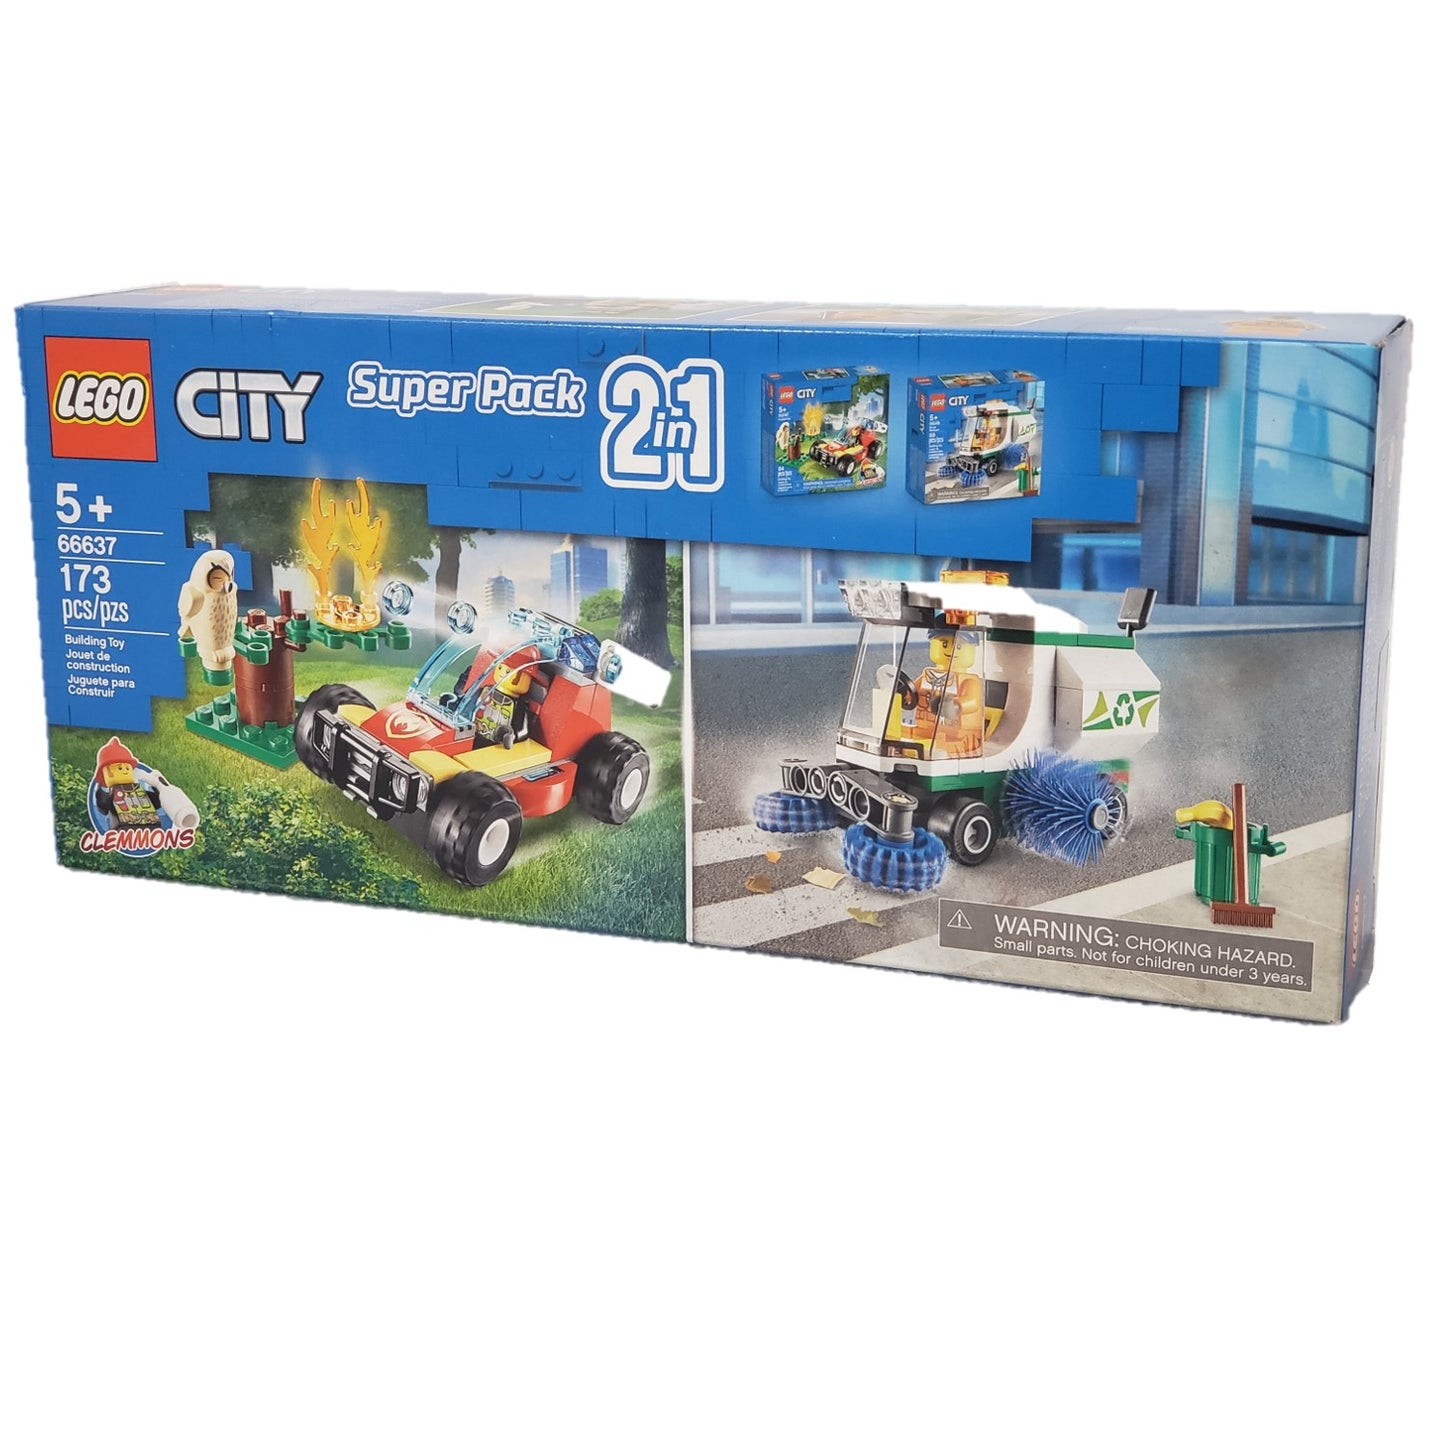 Lego City Super Pack 2 in 1 66637 Building Toy for Kids 173 Pieces